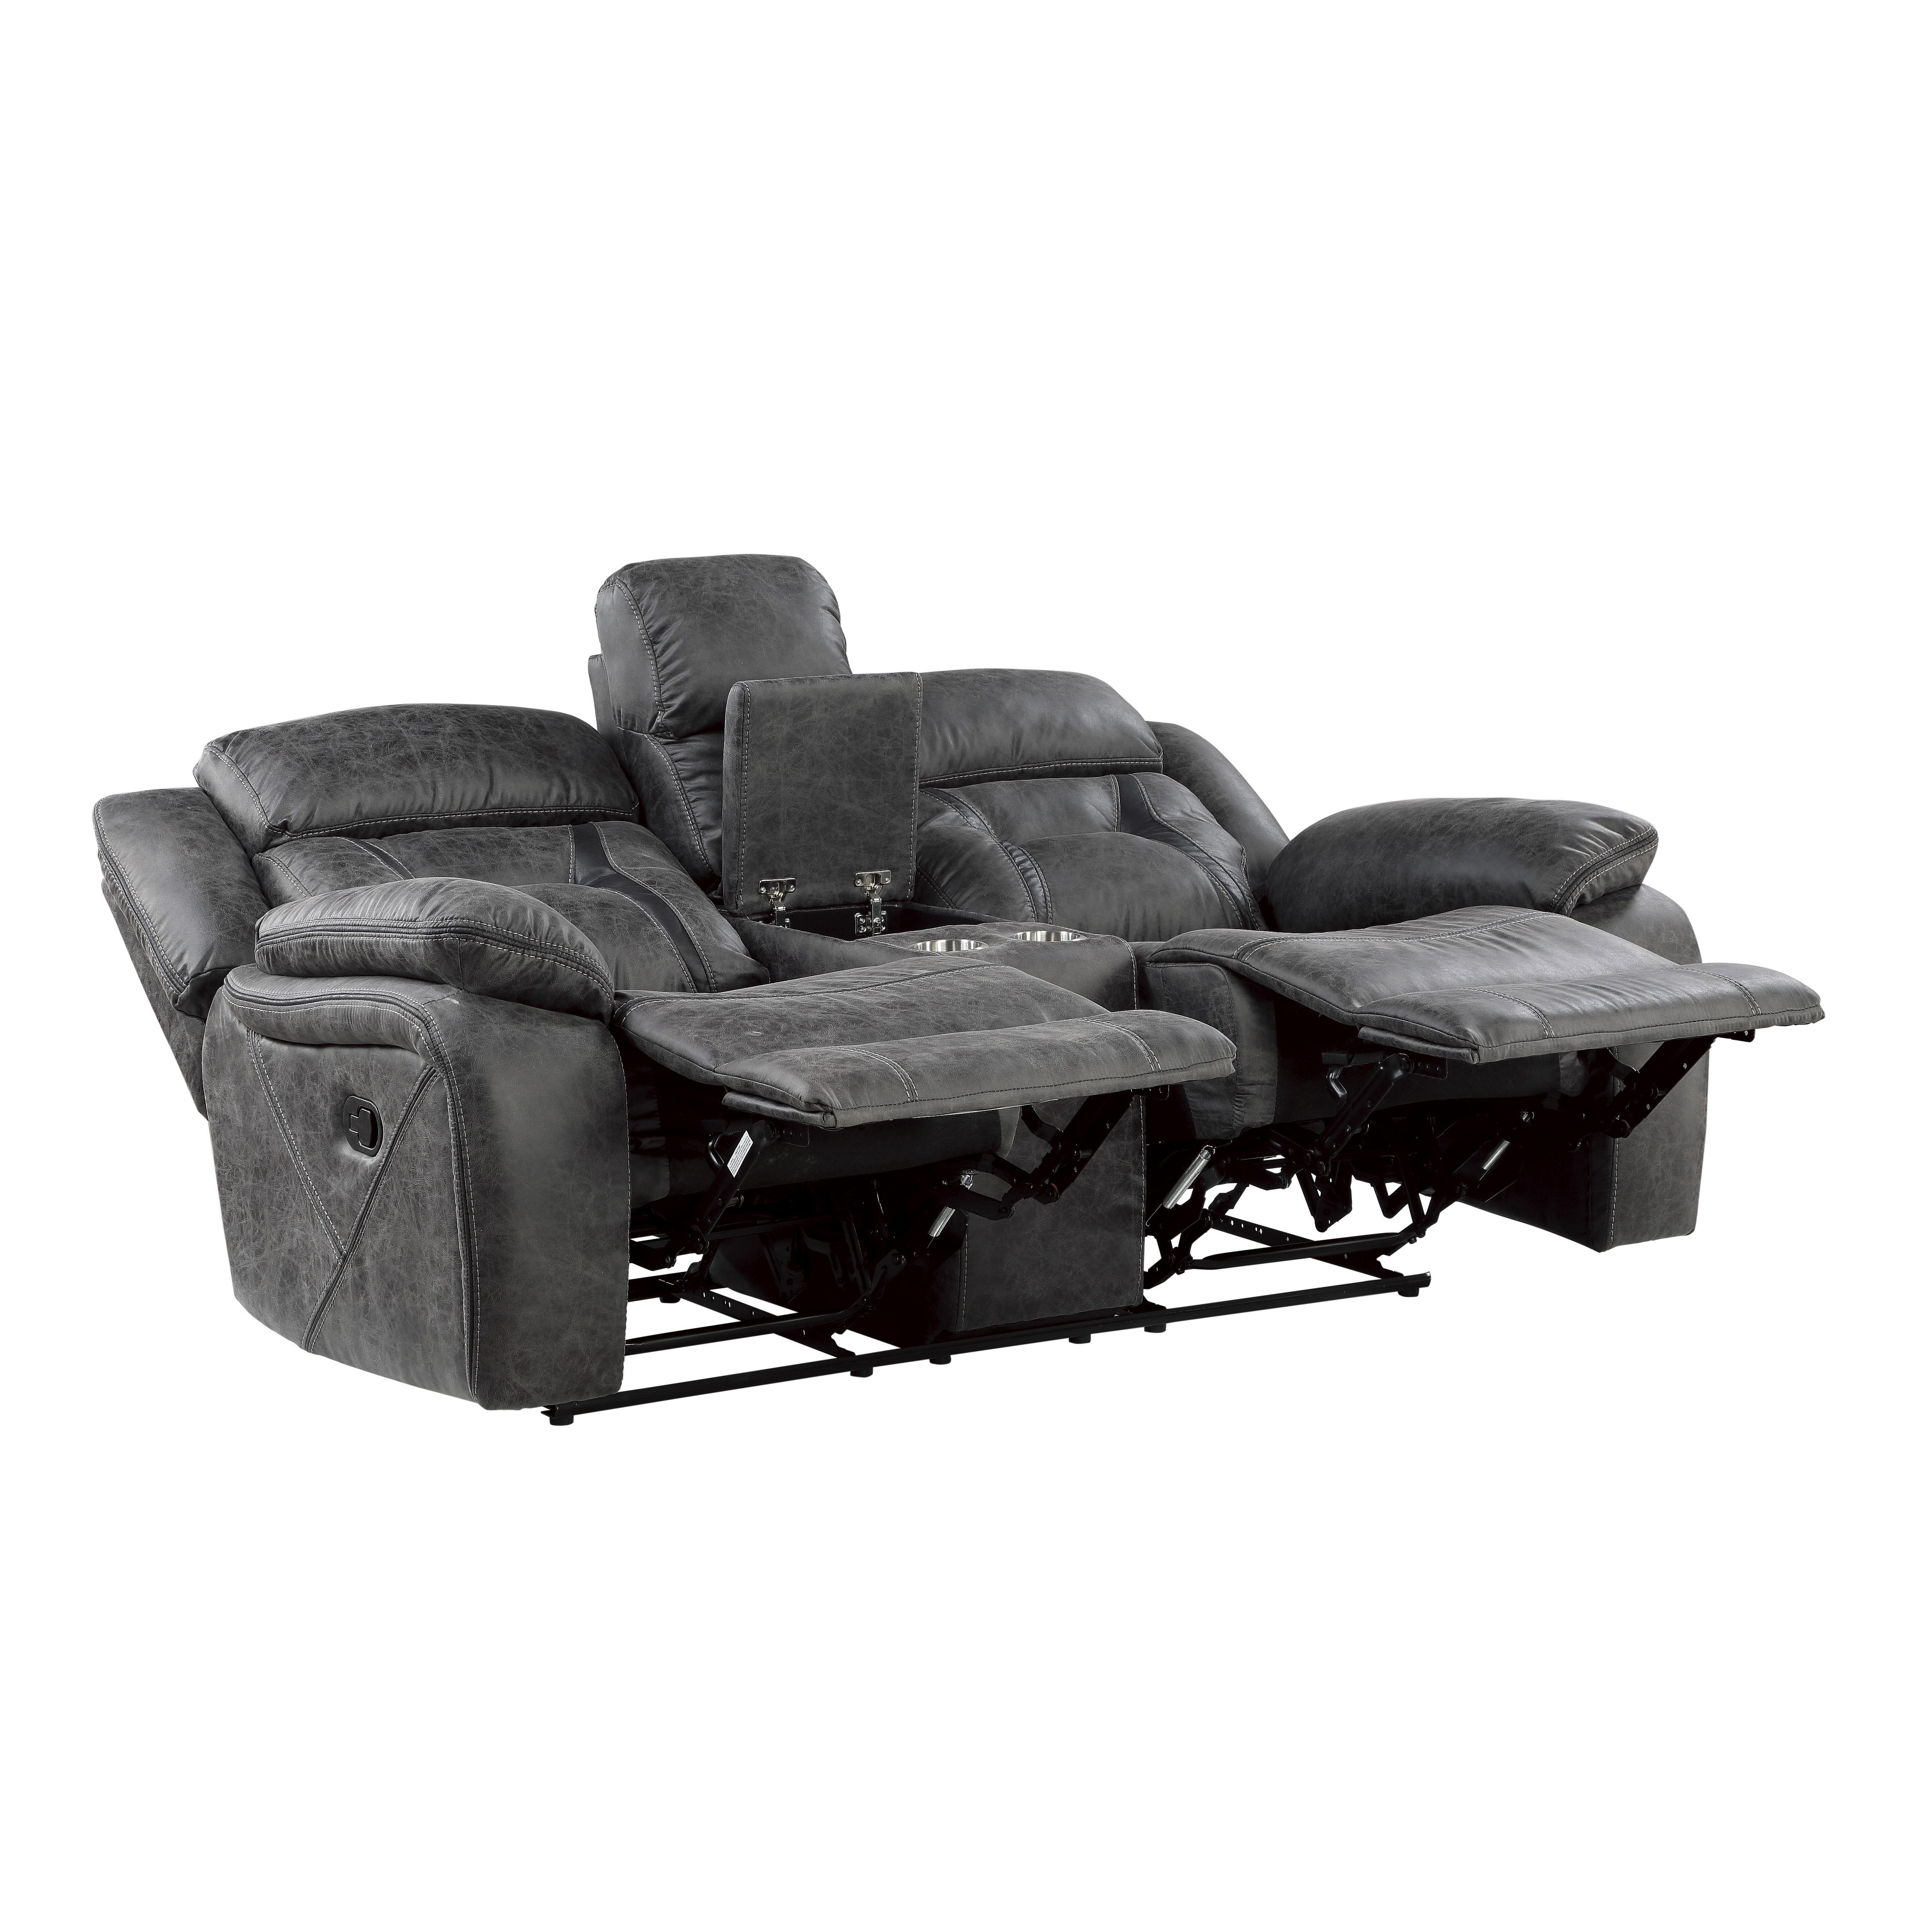 

    
Homelegance 9989GY-2 Madrona Hill Reclining Loveseat Gray 9989GY-2
